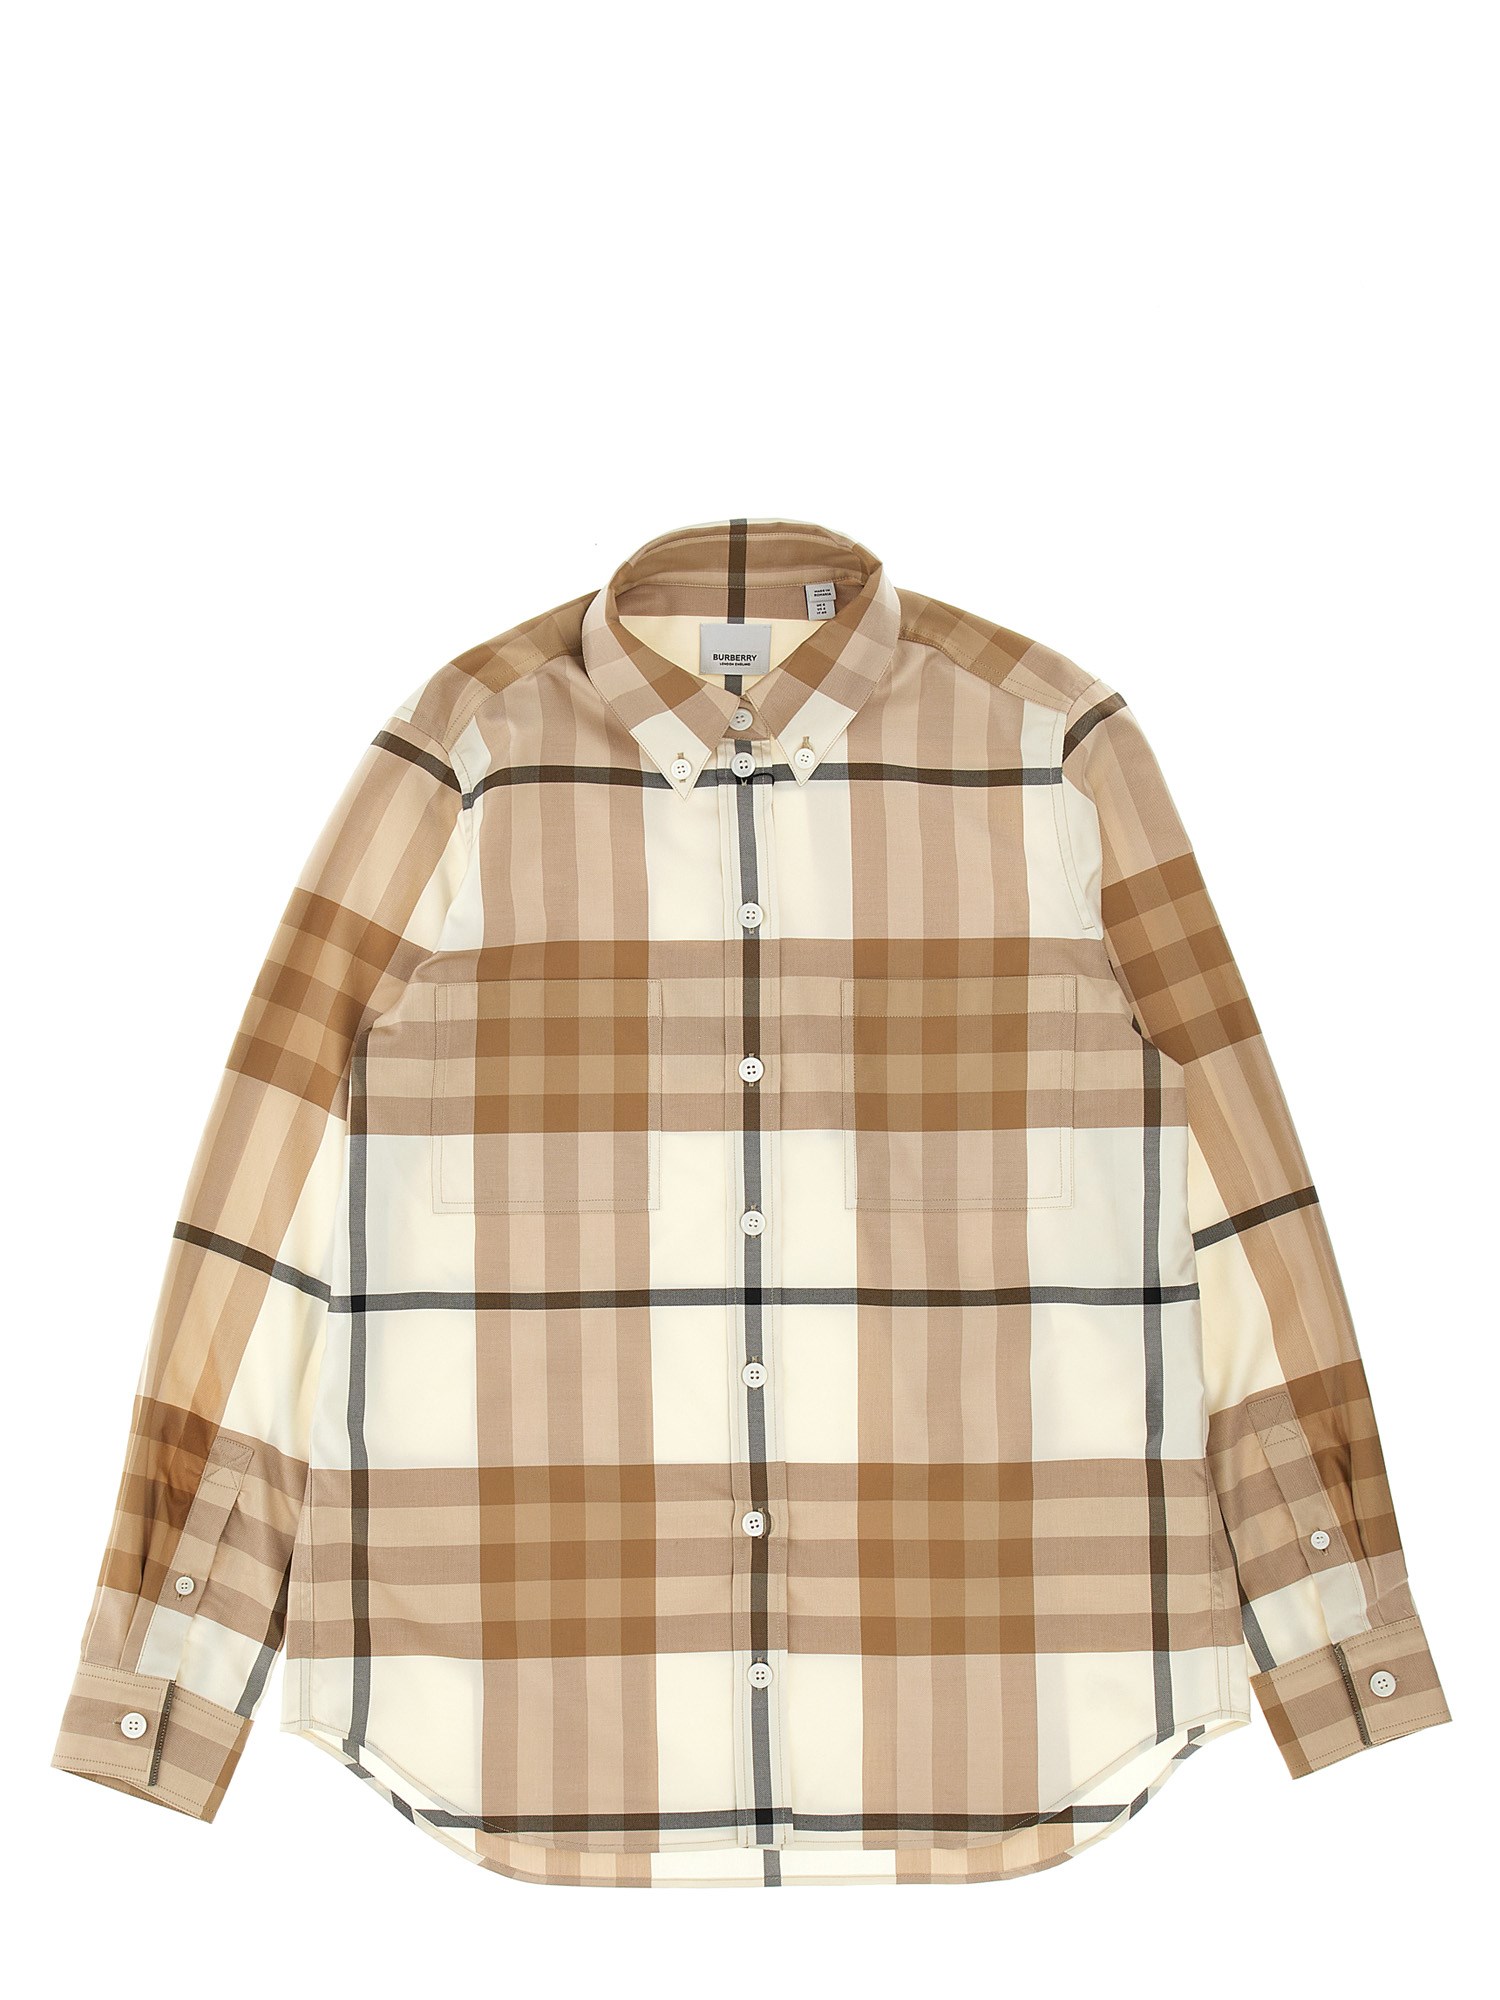 burberry shirt with check pattern